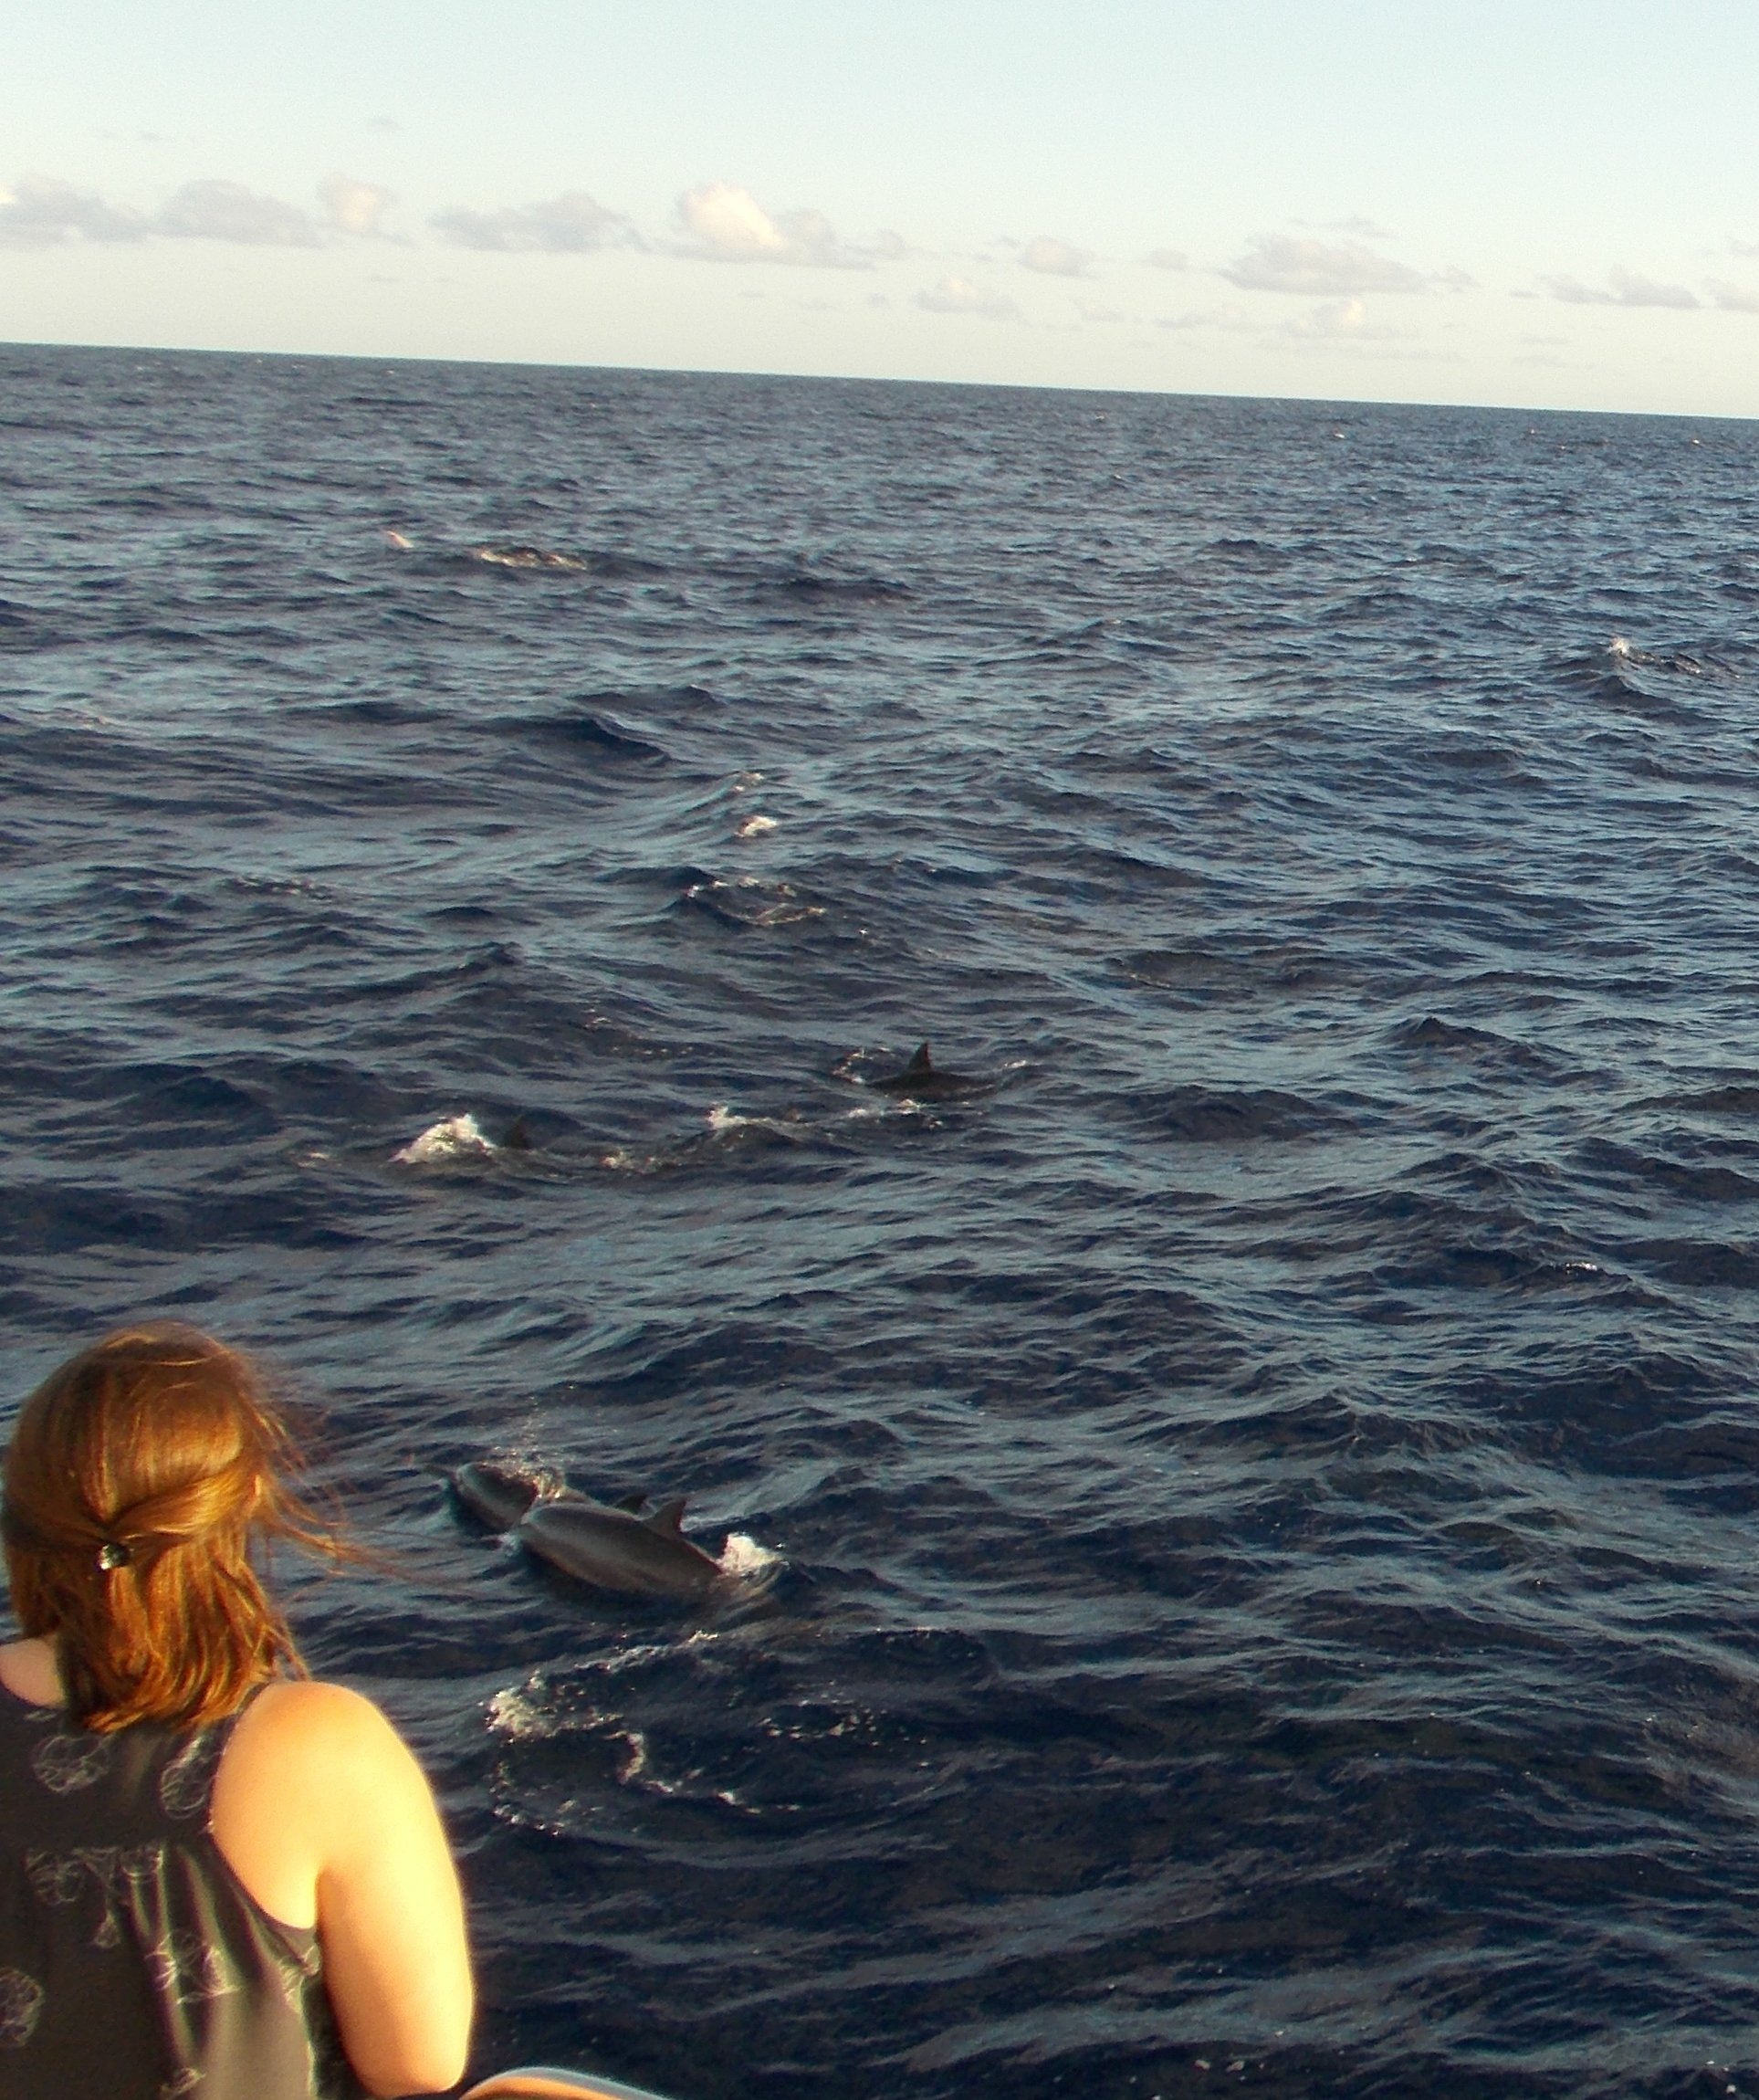 So many spinner dolphins - whale watching Kauai